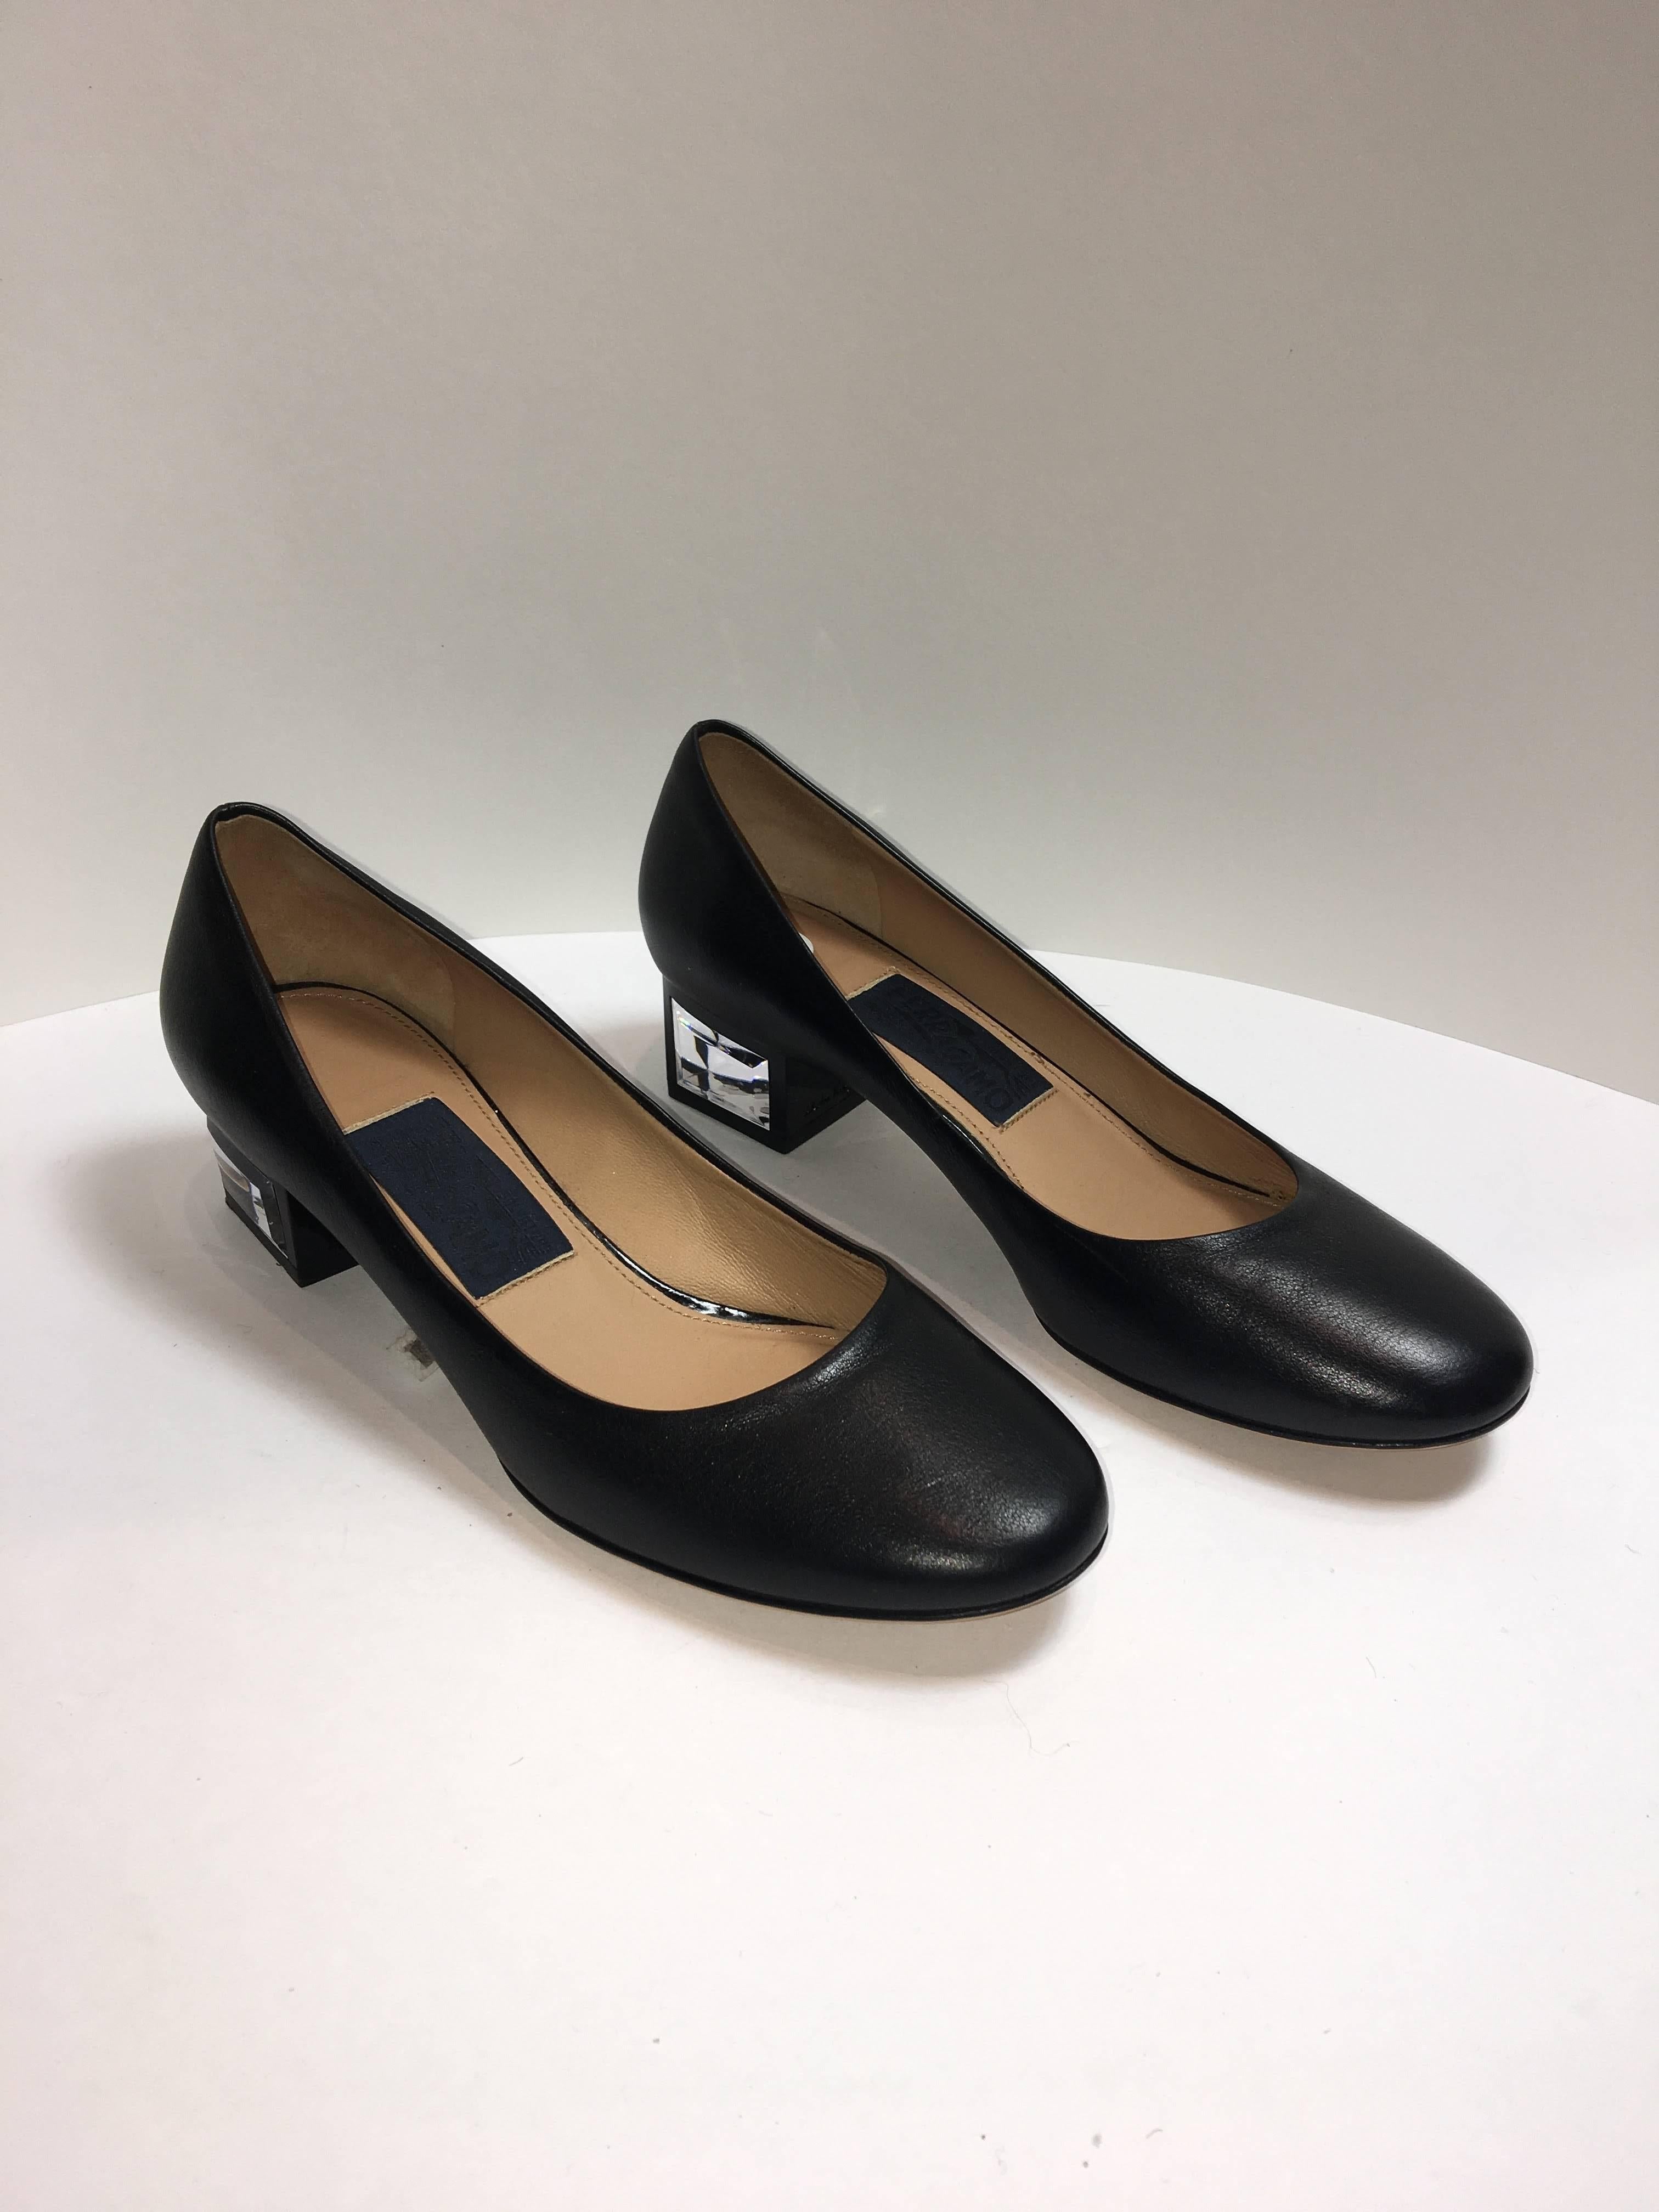 Ferragamo Black Leather Round Toe with Faceted Chunk Heel.